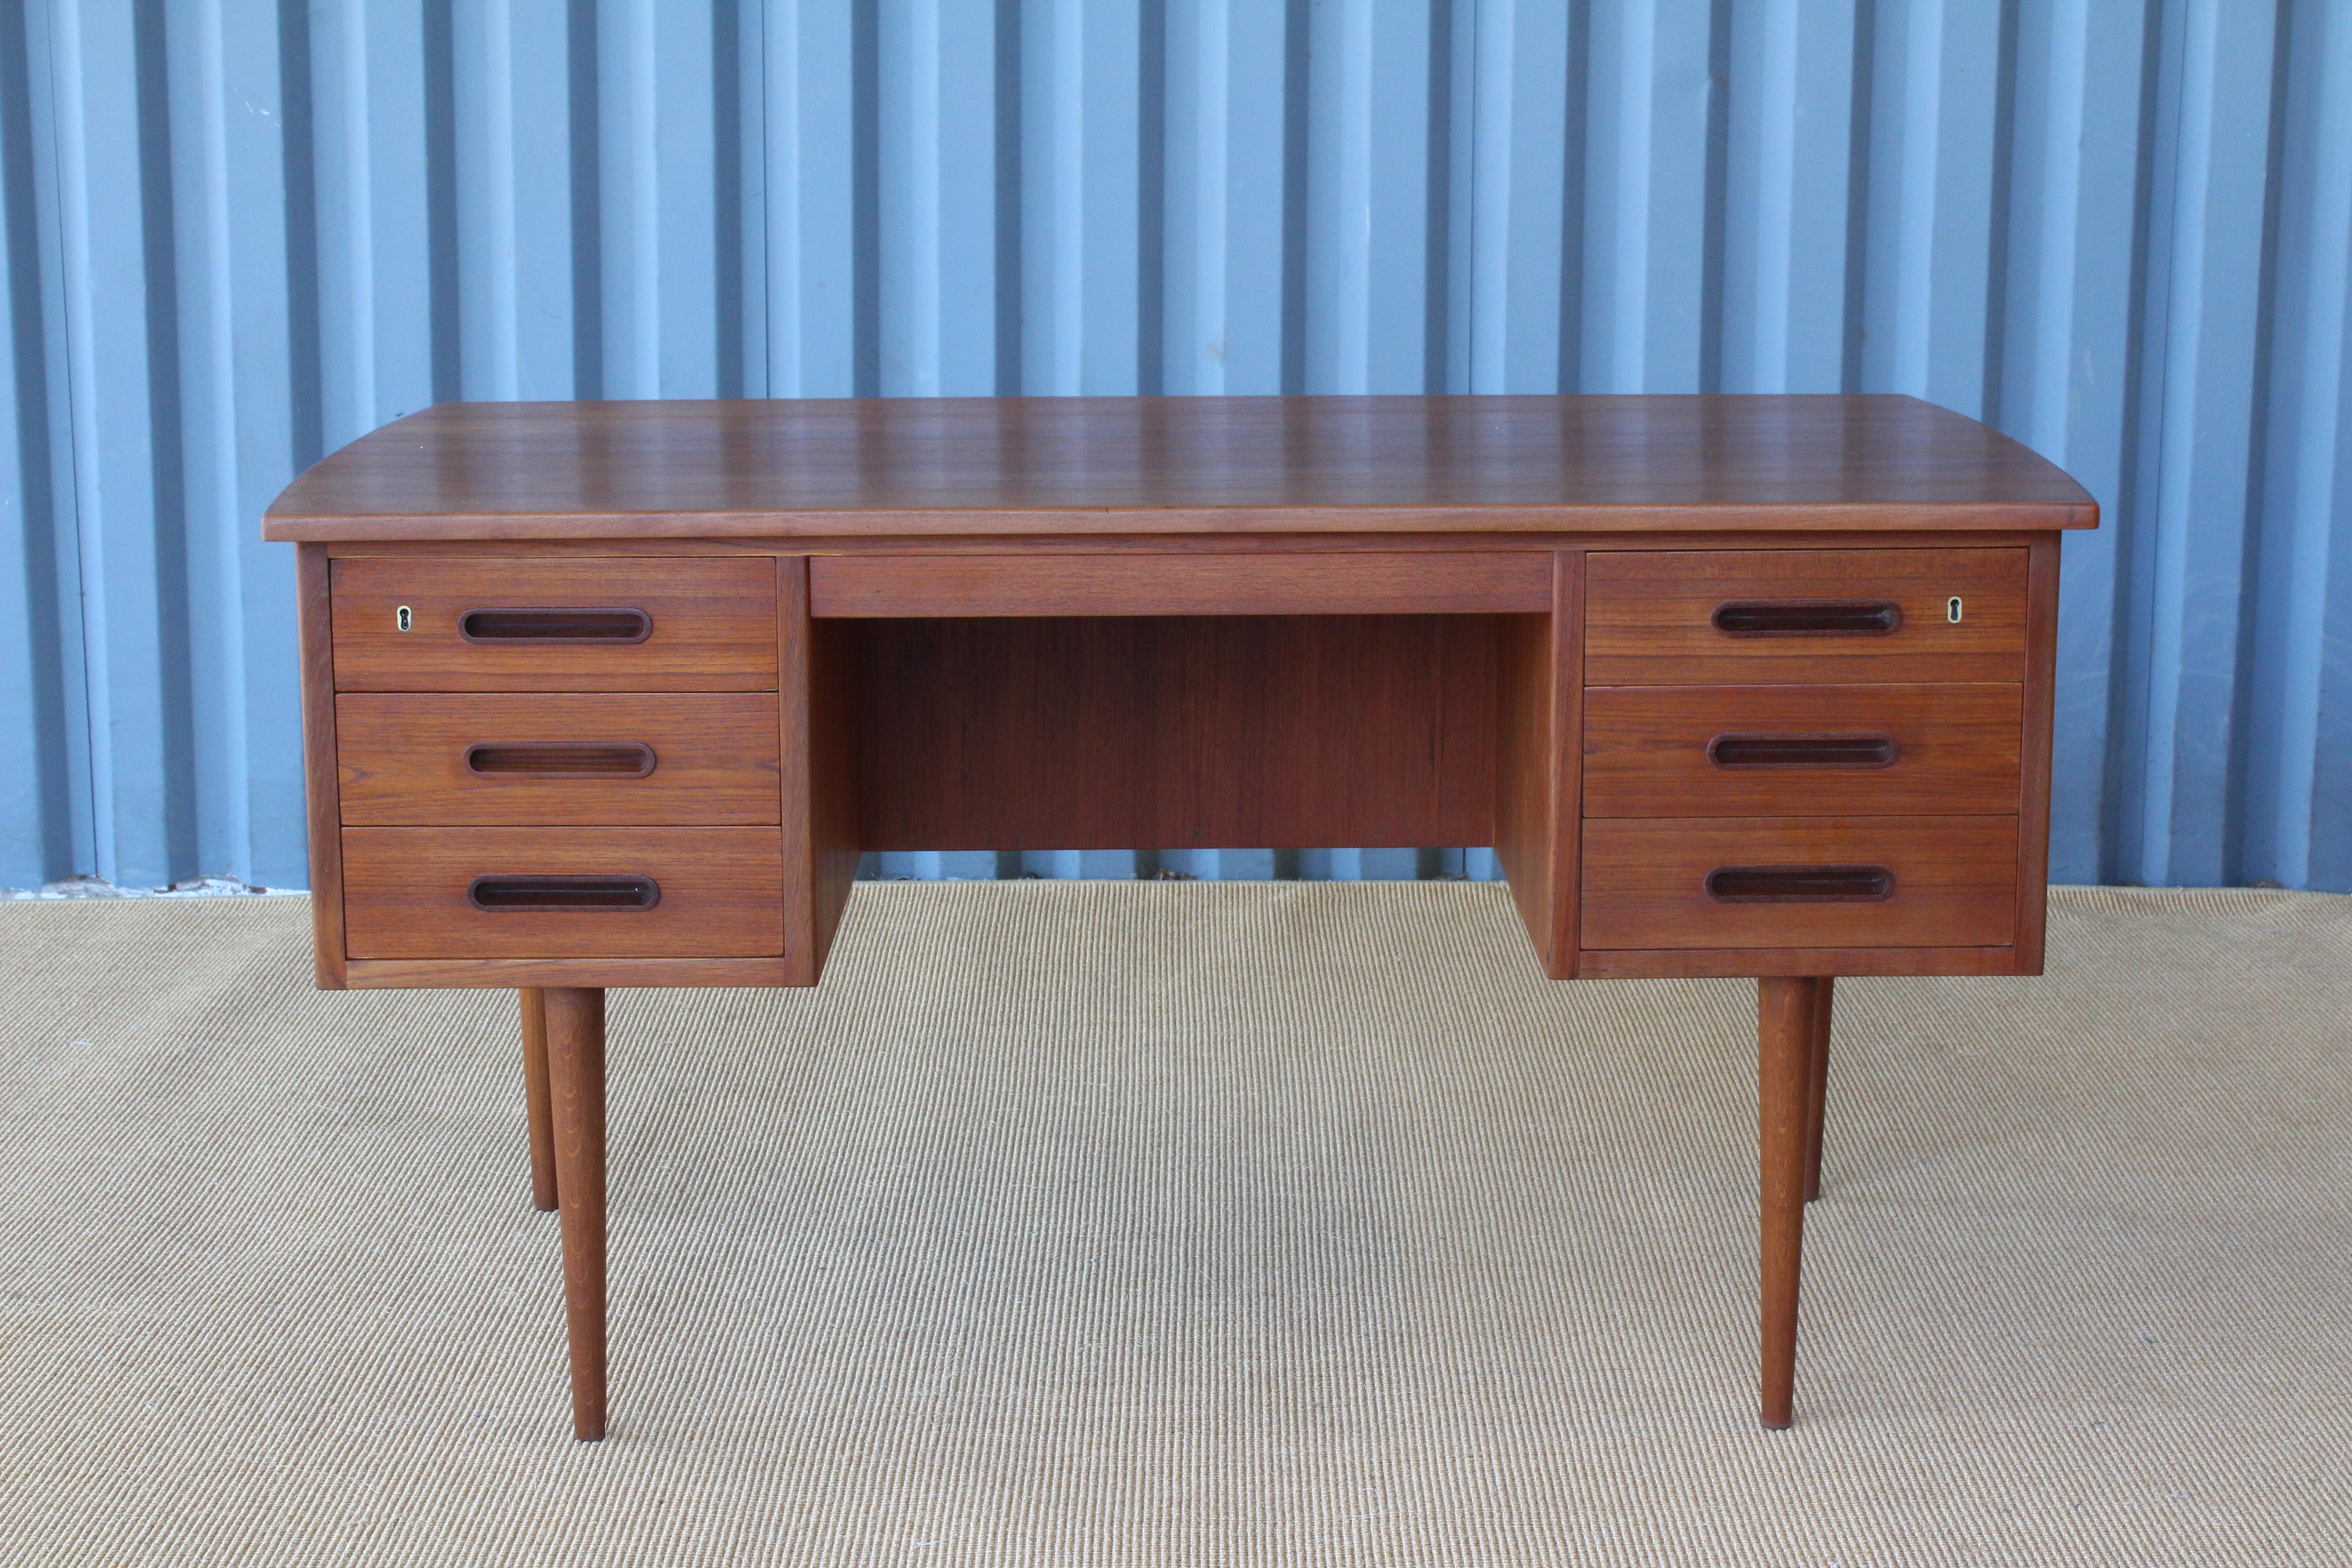 1950s Danish teak desk. The front side is slightly curved, backside features a bookshelf. Total of six dovetail drawers with two locking top drawers. Includes original key. Newly refinished.